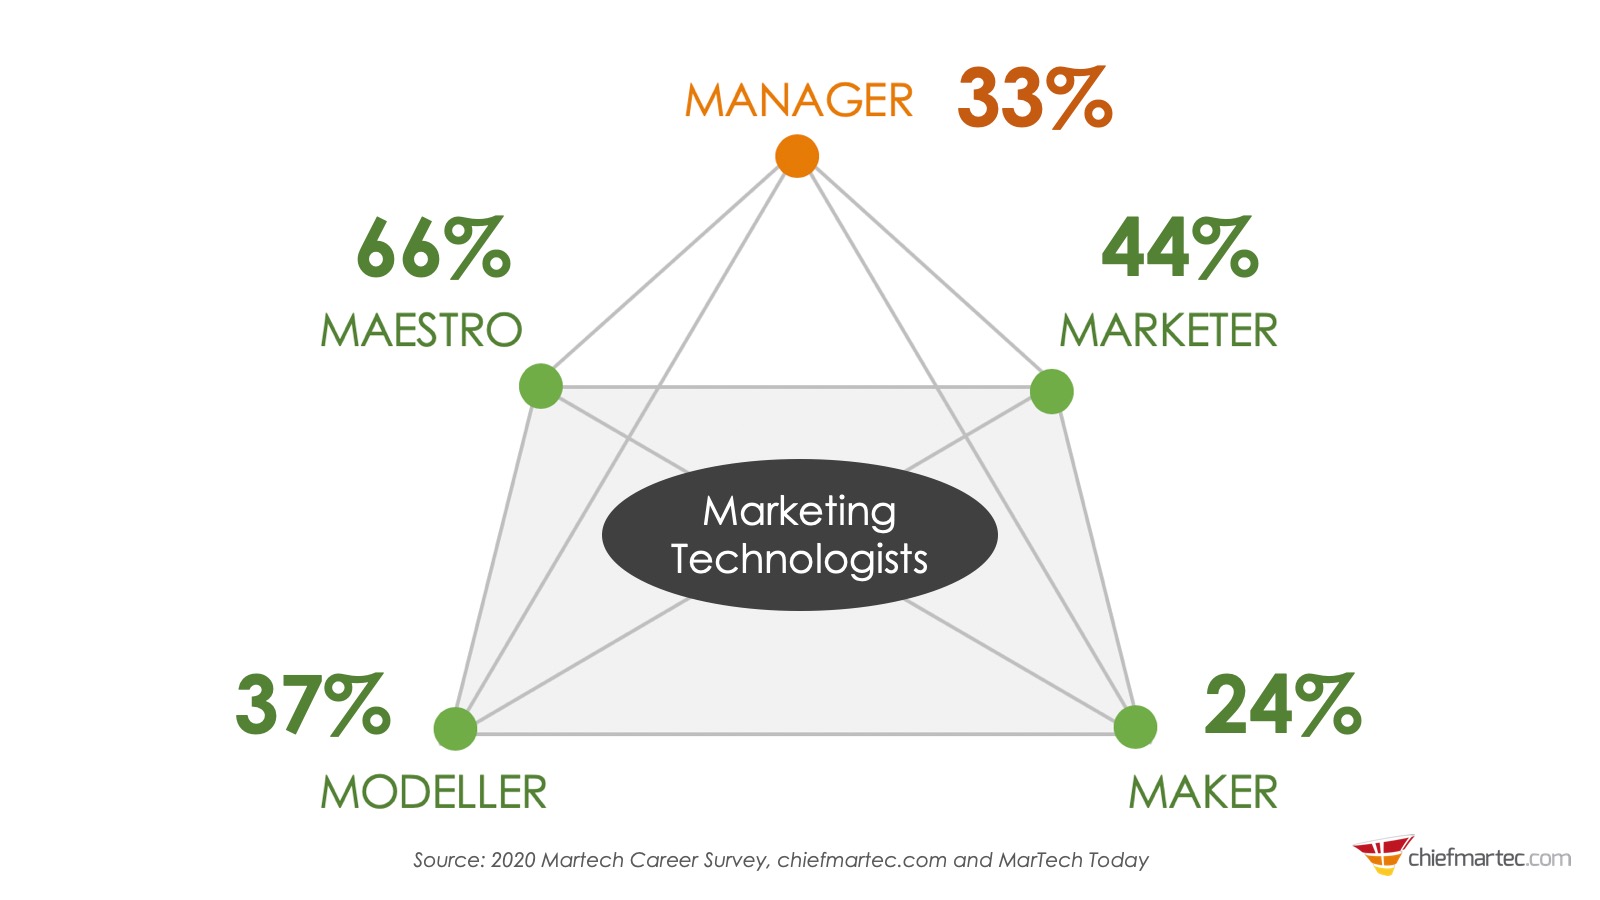 5 Kinds of Marketing Technologists in the 2020 Martech Career Survey